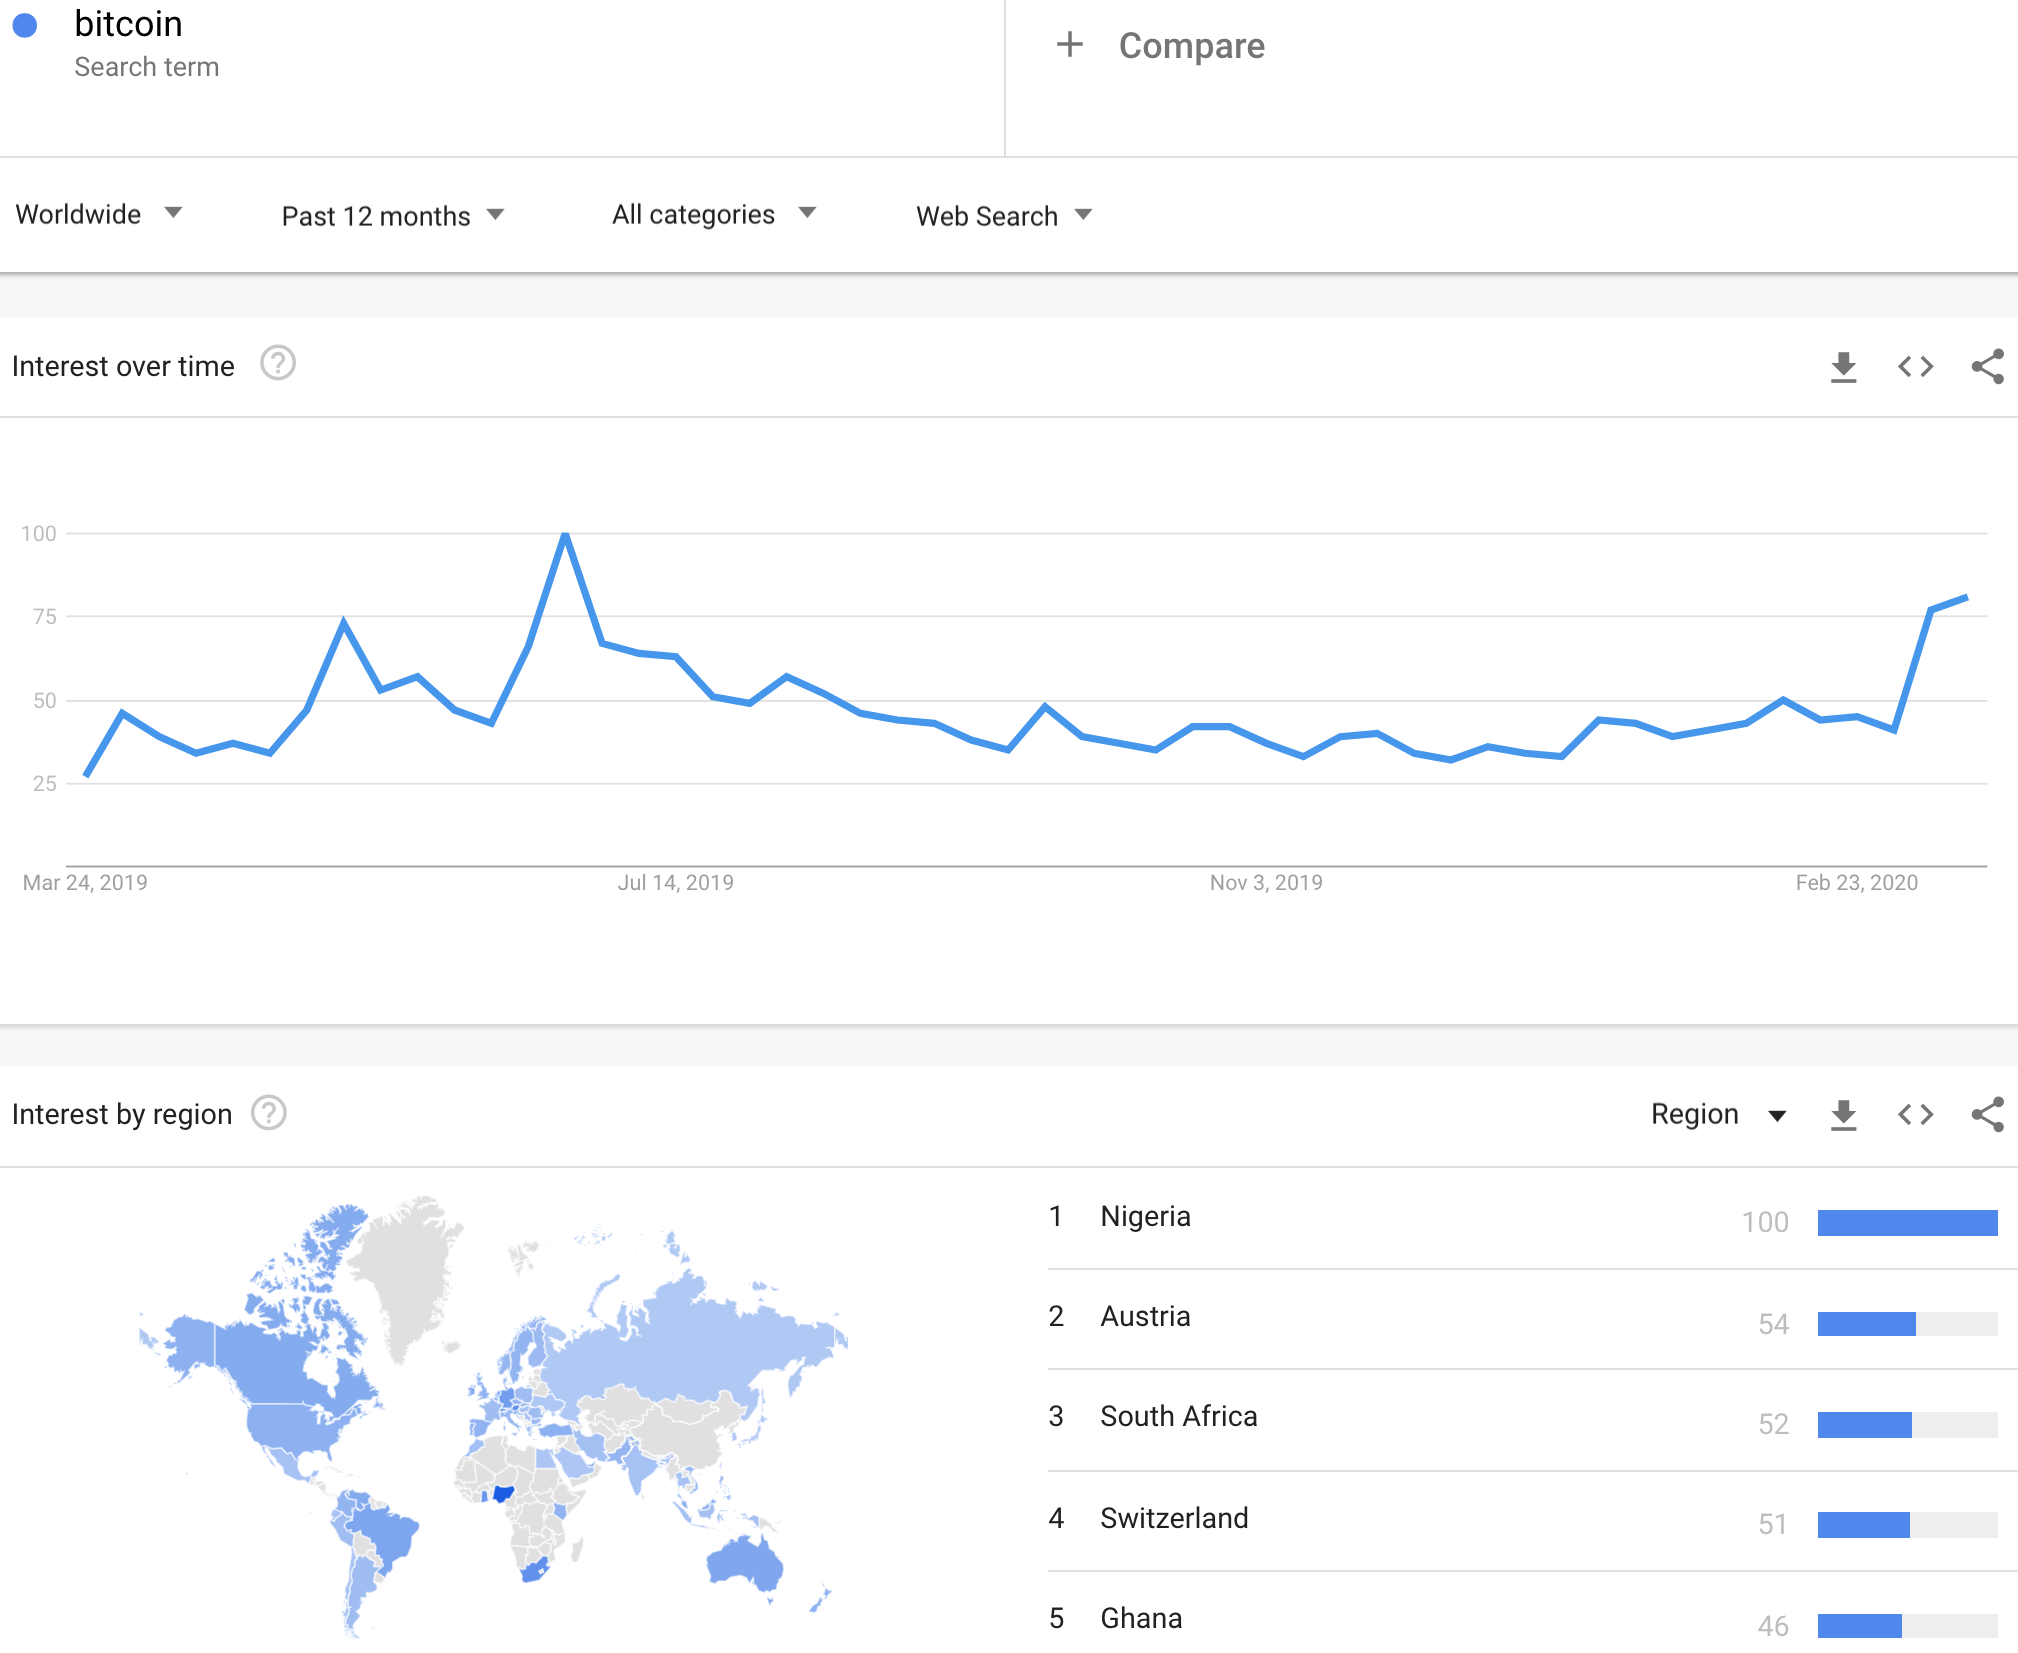 Google Trends for Bitcoin finally woke up in the wake of Bitcoin's plunge. The Google search index almost reached levels last seen during last June's topping action.